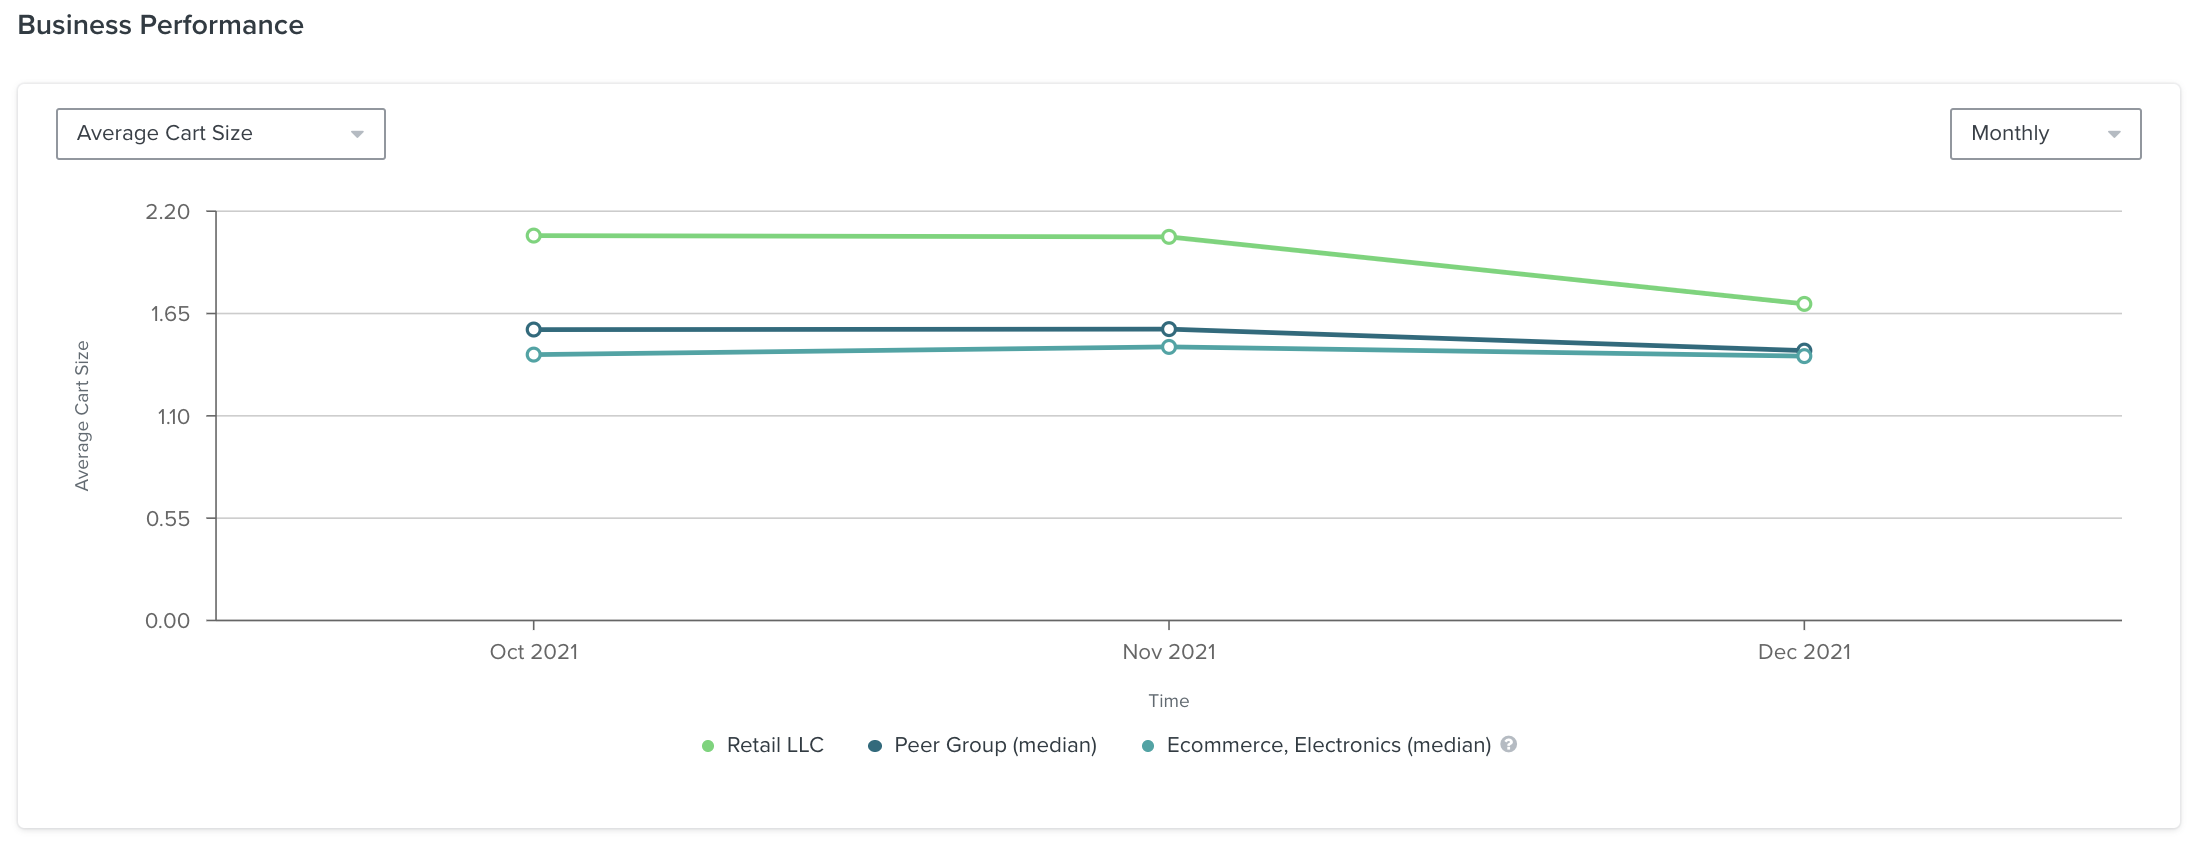 Example of a line chart on the Business Performance page showing average cart size monthly